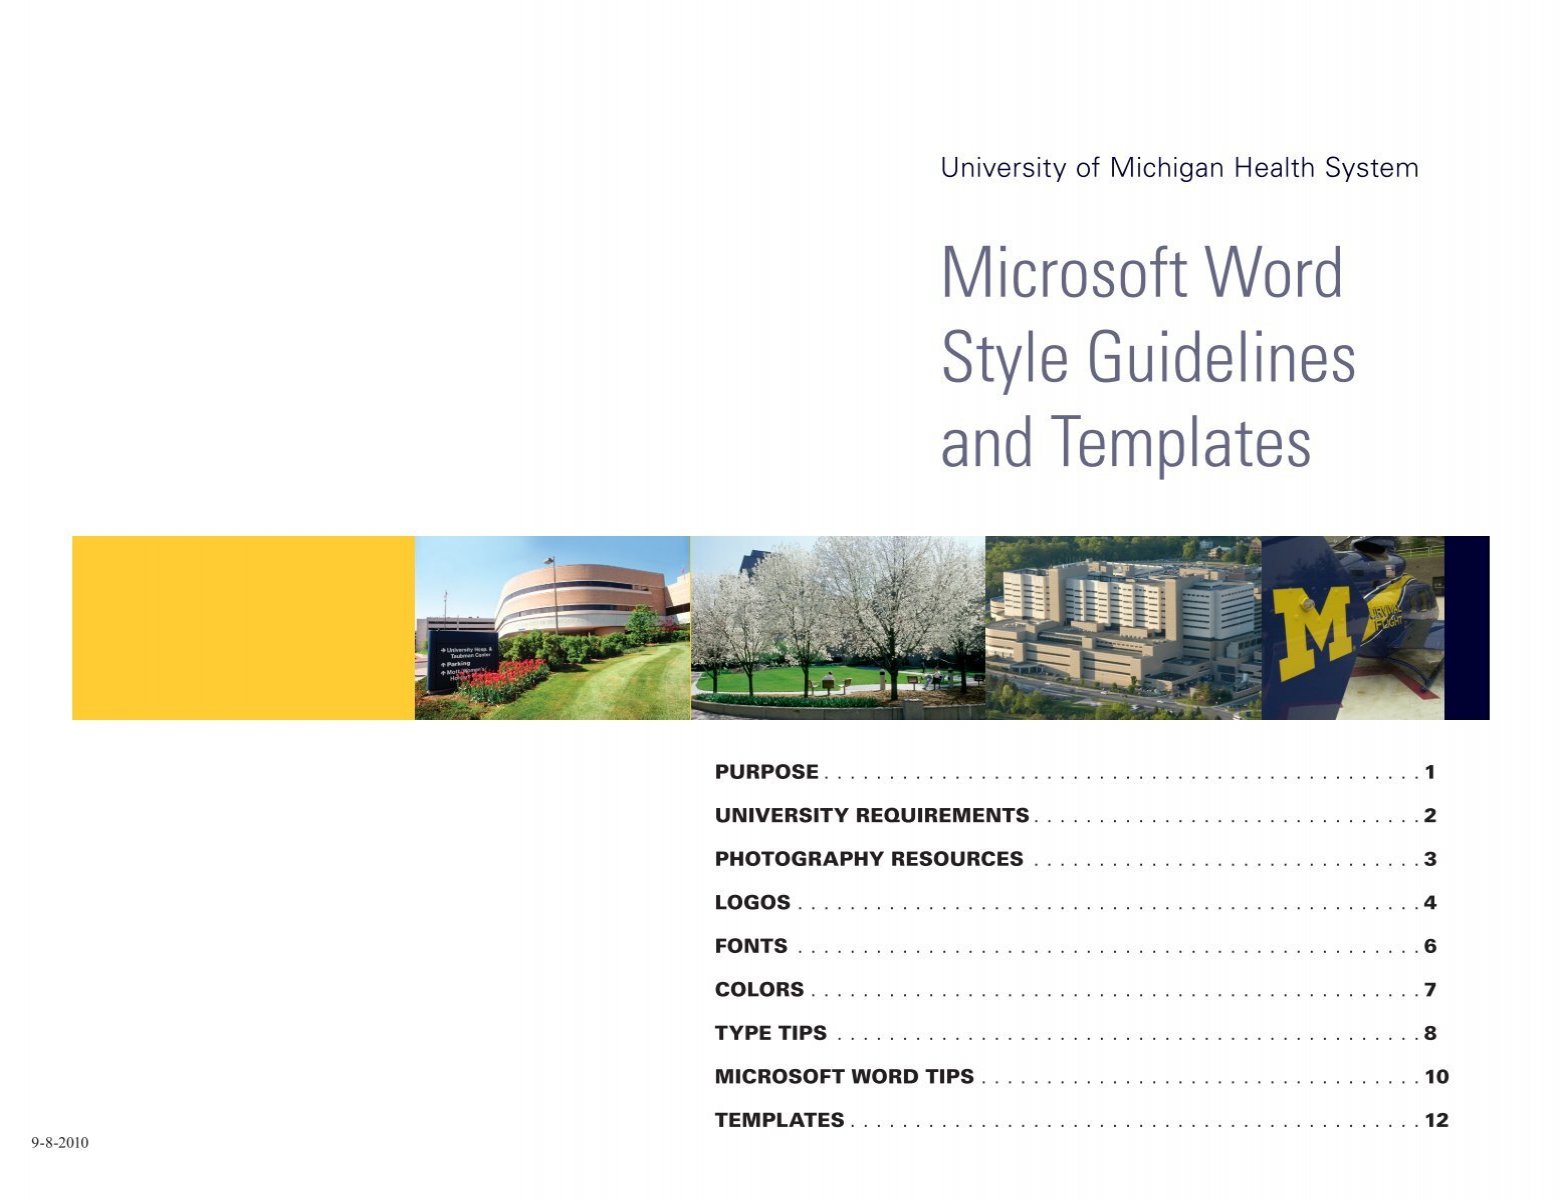 microsoft-word-style-guidelines-and-templates-university-of